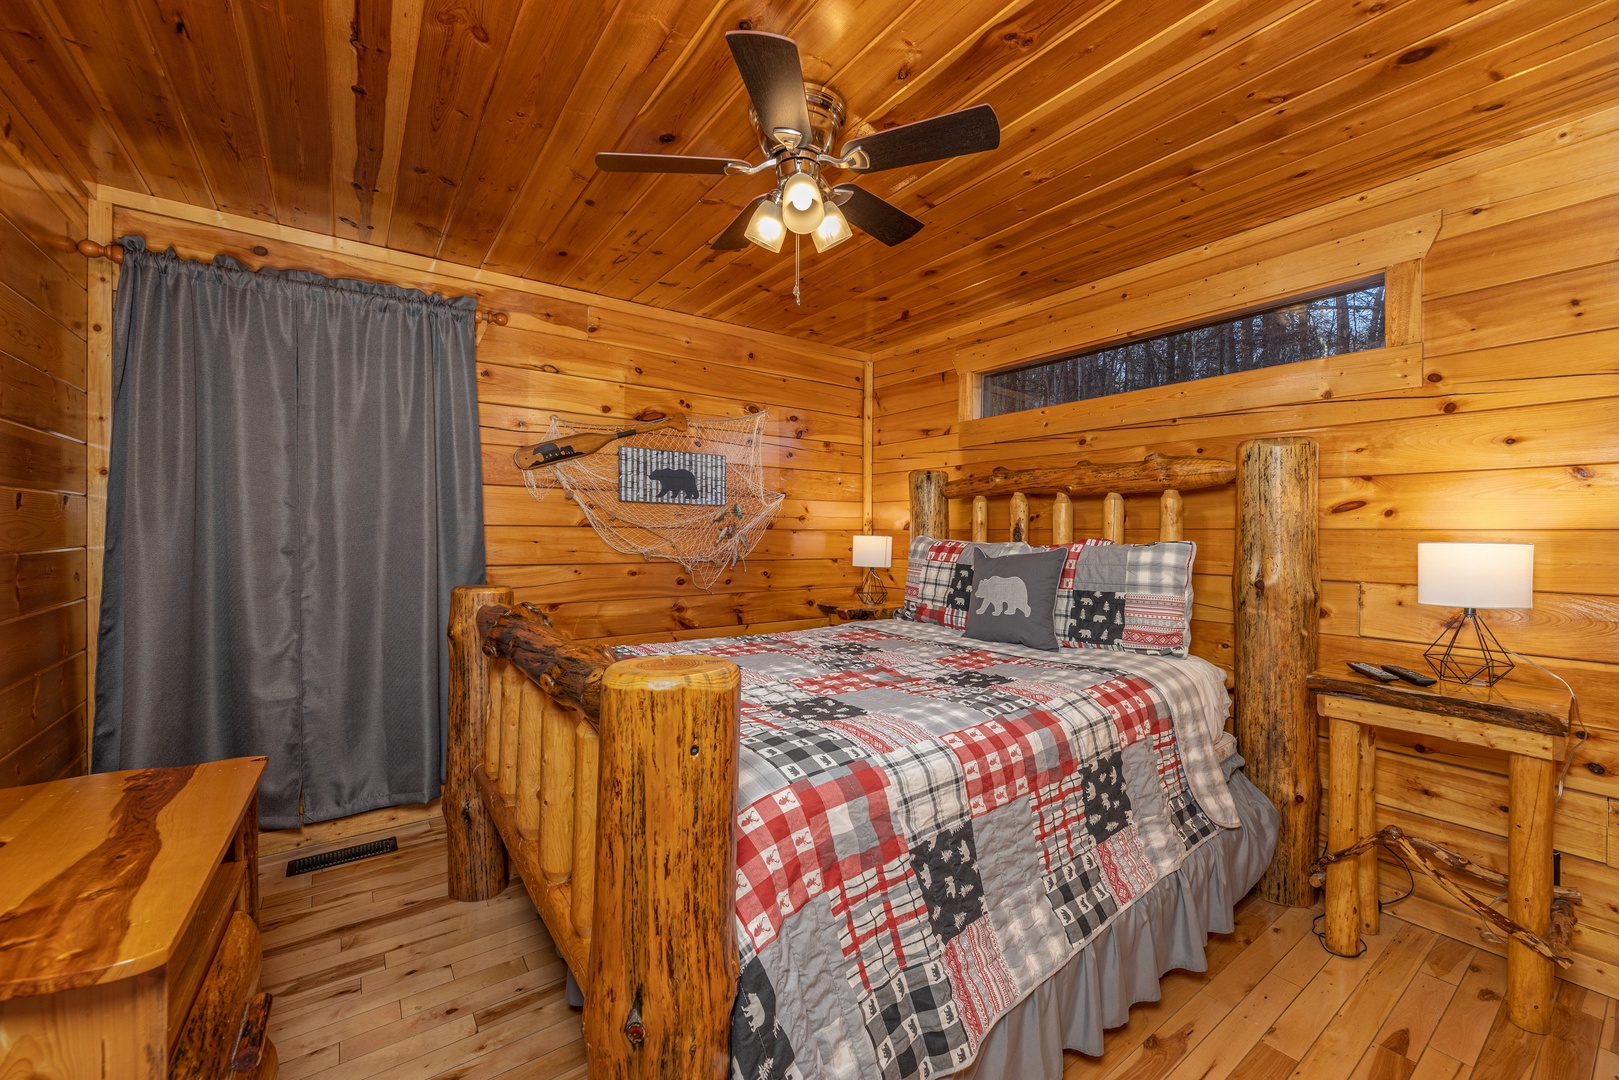 Bedroom with a log bed, night stands and lamps at A Bear on the Ridge, a 2 bedroom cabin rental located in Pigeon Forge